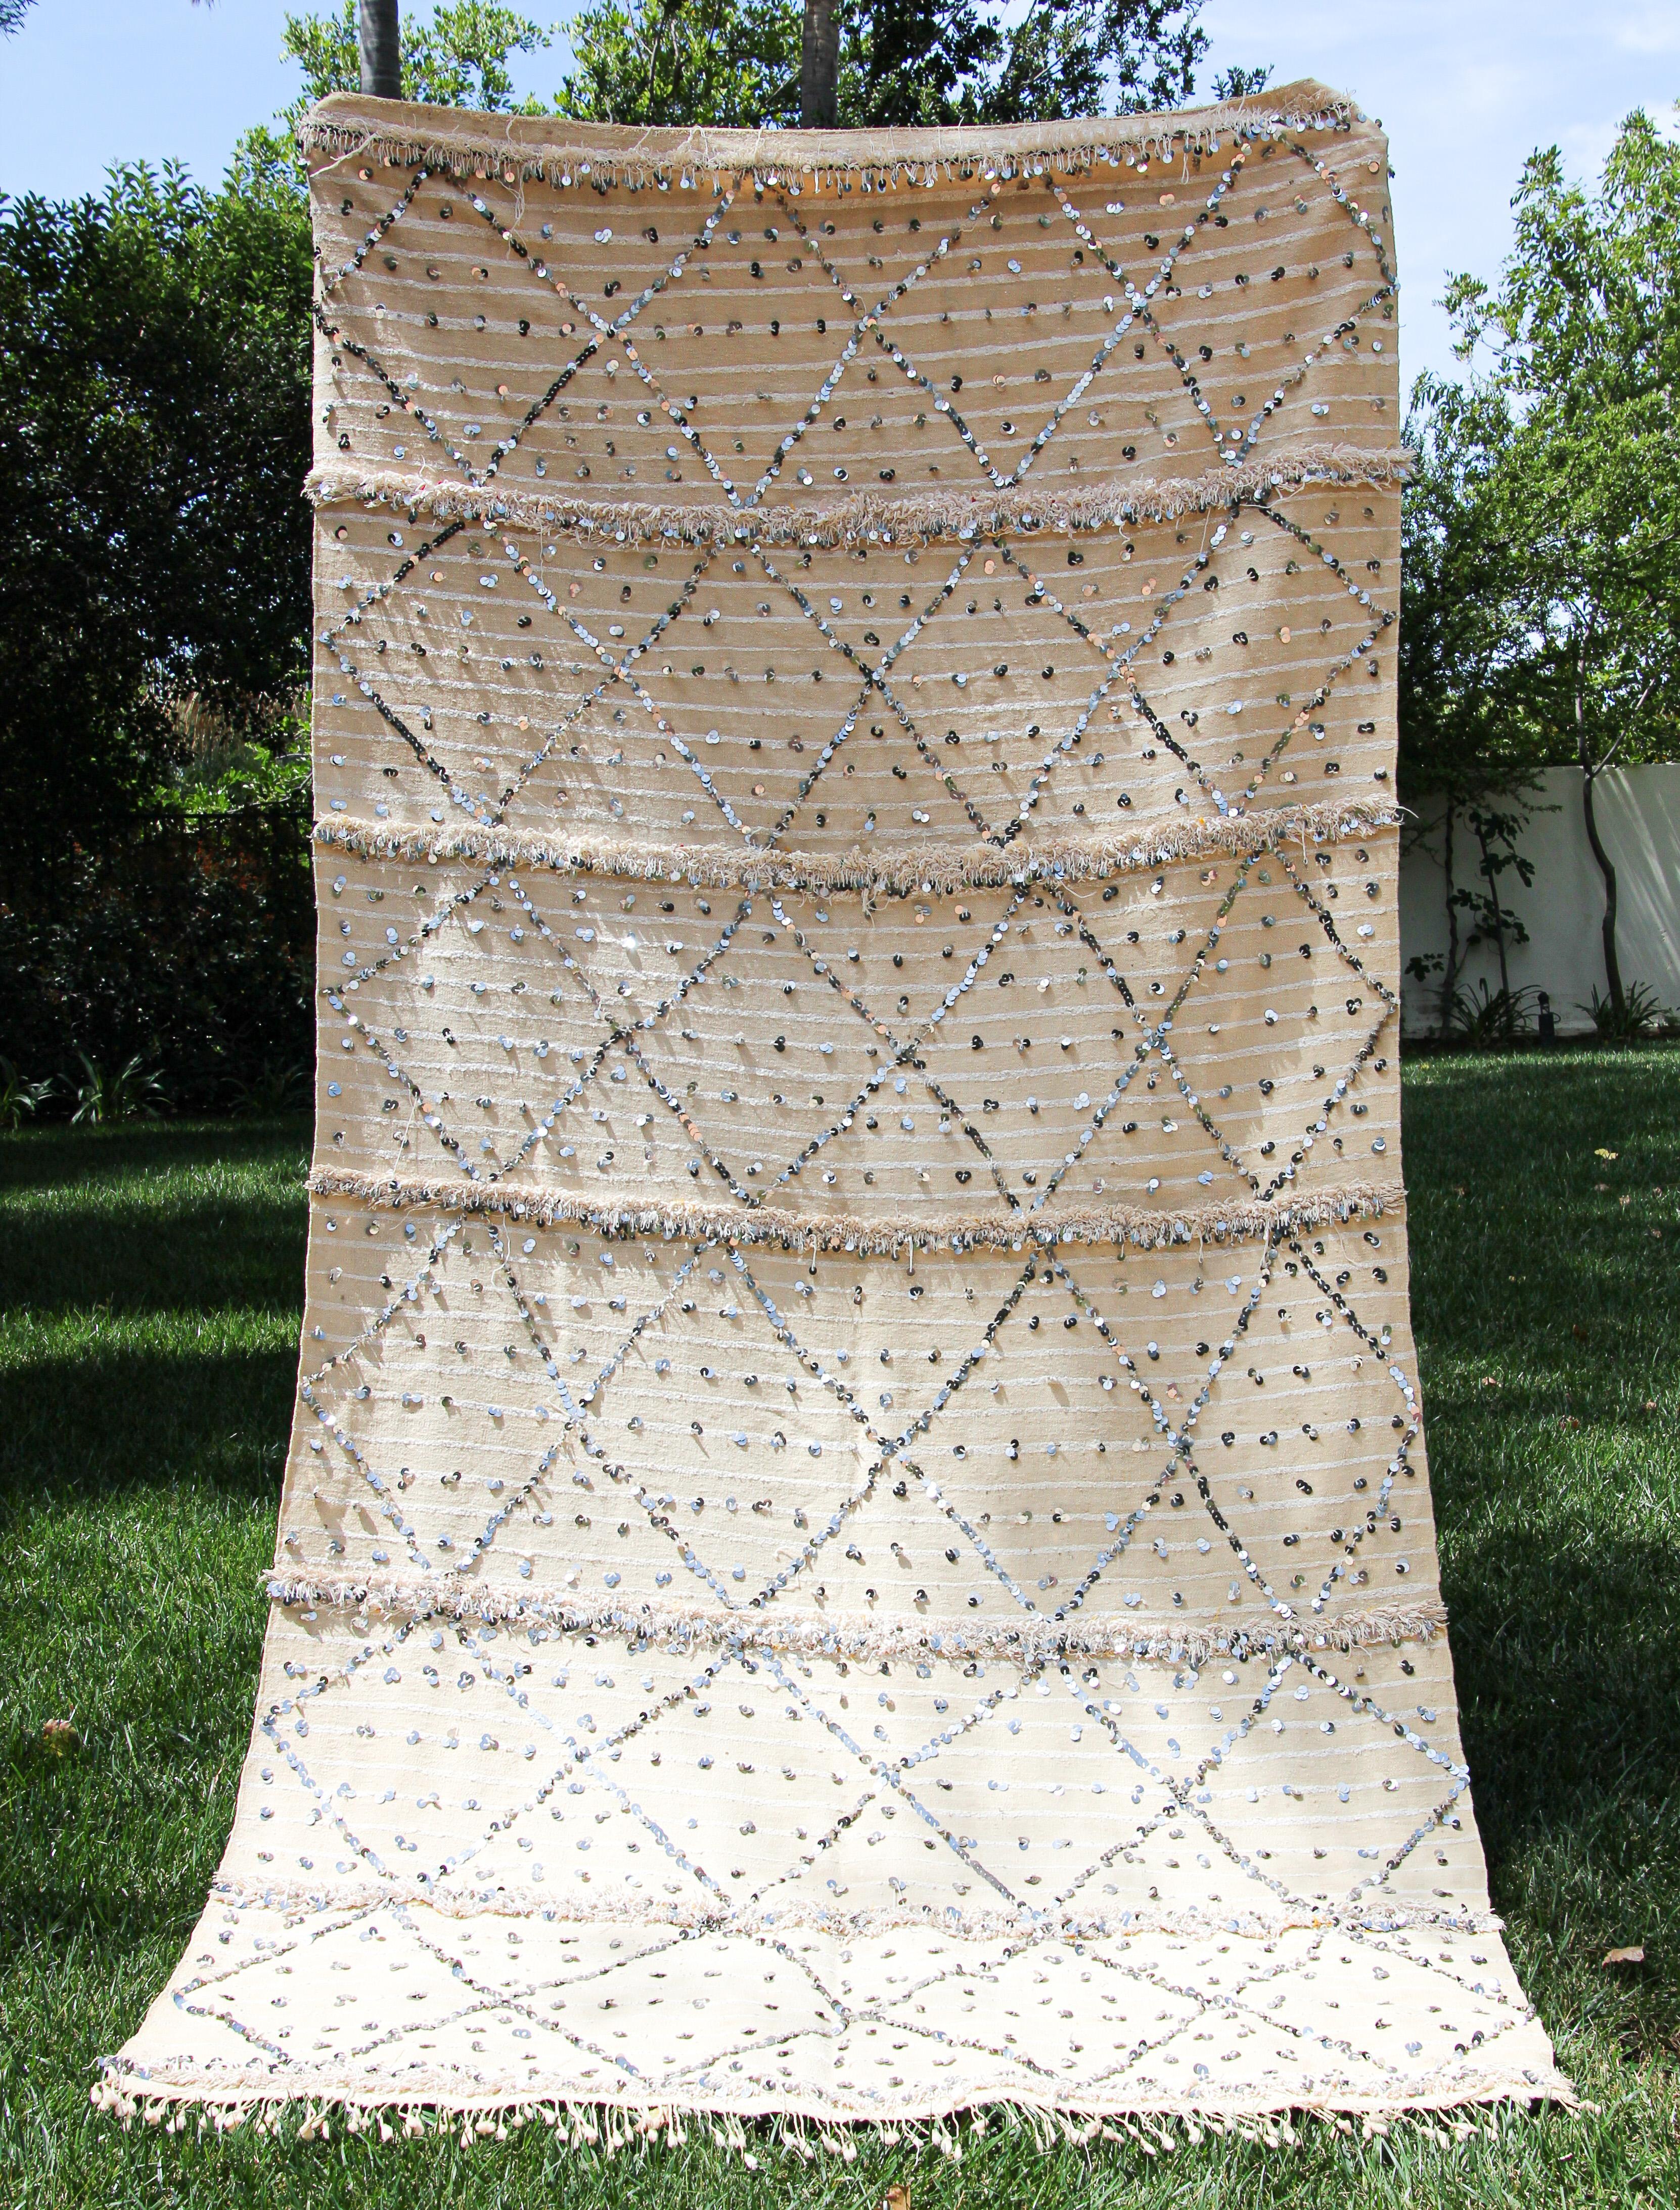 Very large vintage original tribal Moroccan wedding Berber women shawl, blanket, throw.
The Zaiane tribal shawls incorporate quantities of sequins in their design to achieve an impressive decorative effect on the alternate stripes of wool and cotton